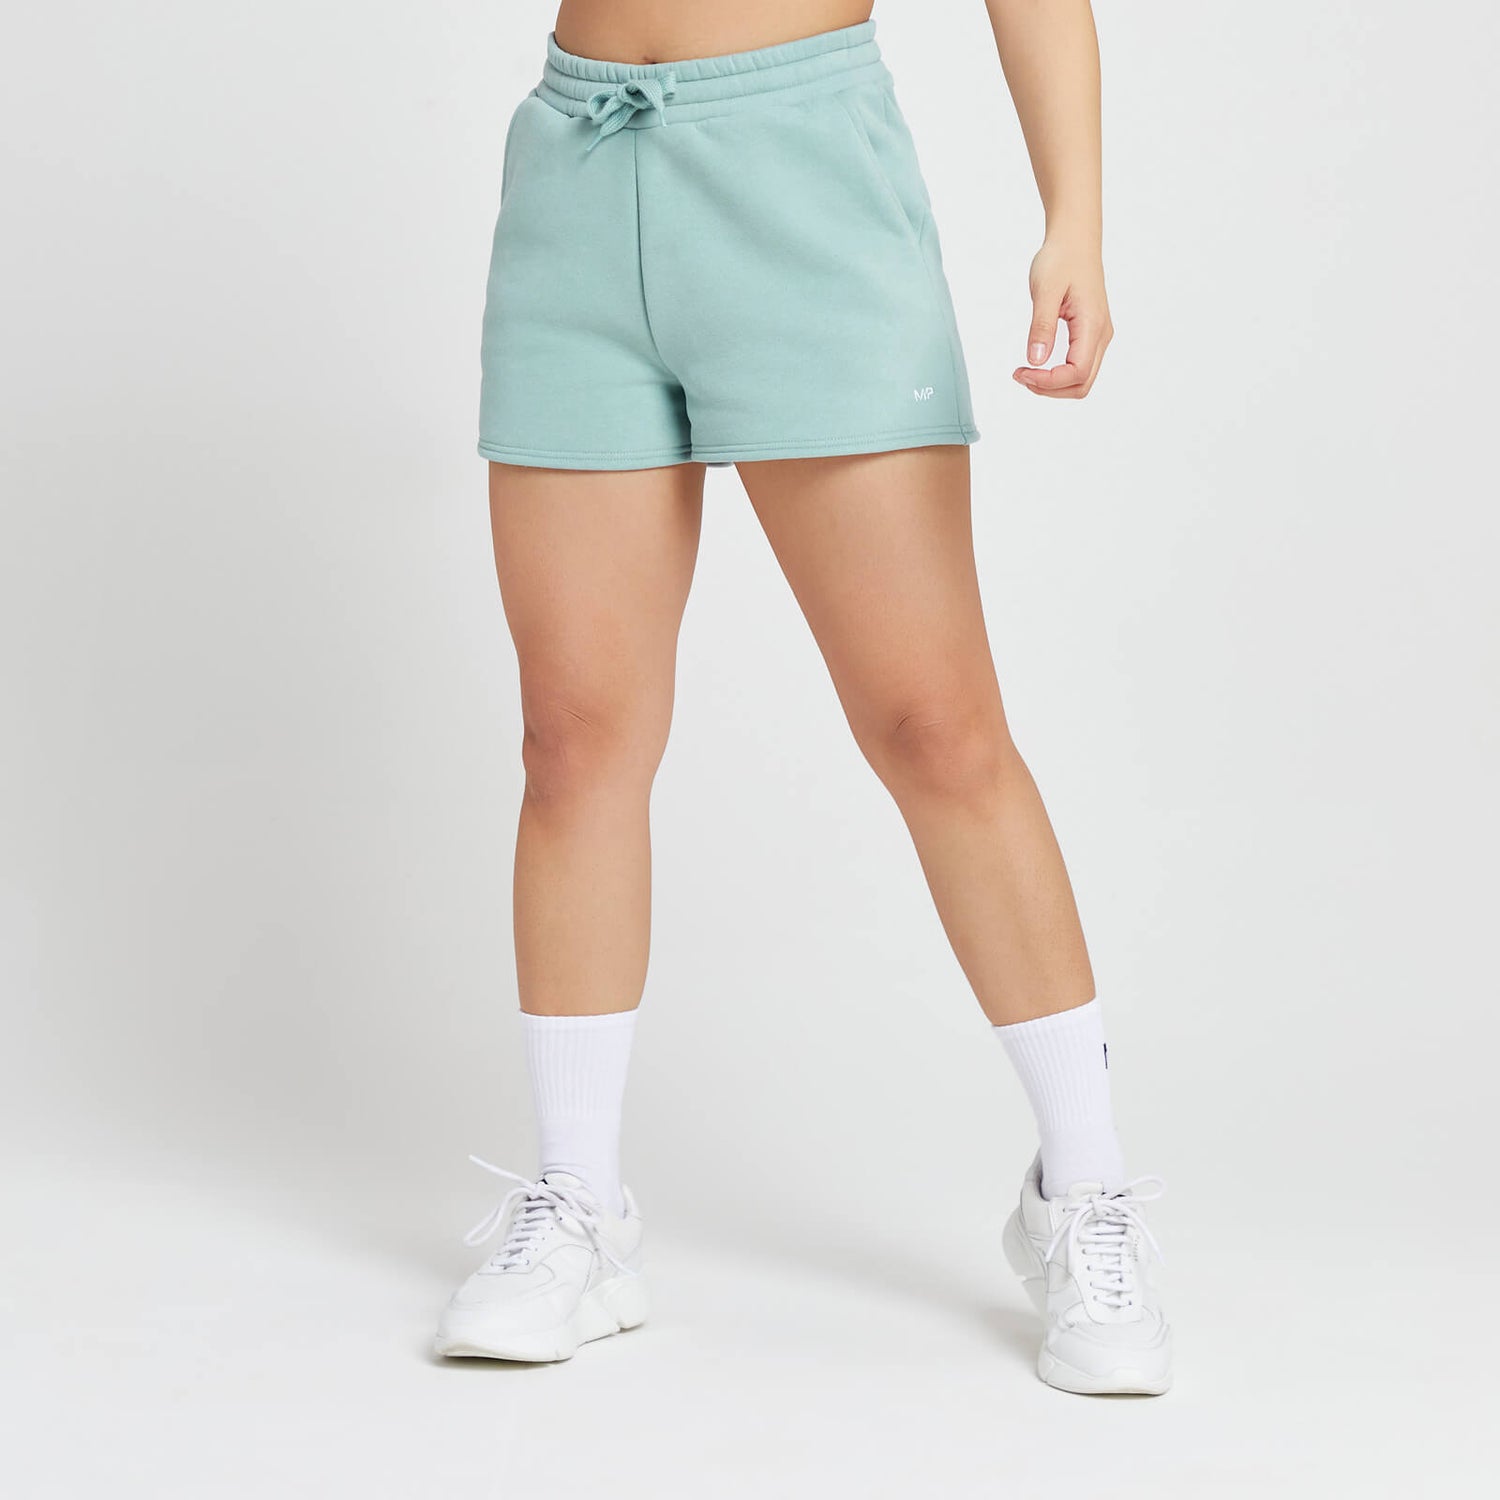 MP Women's Rest Day Lounge Shorts - Ice Blue - XS